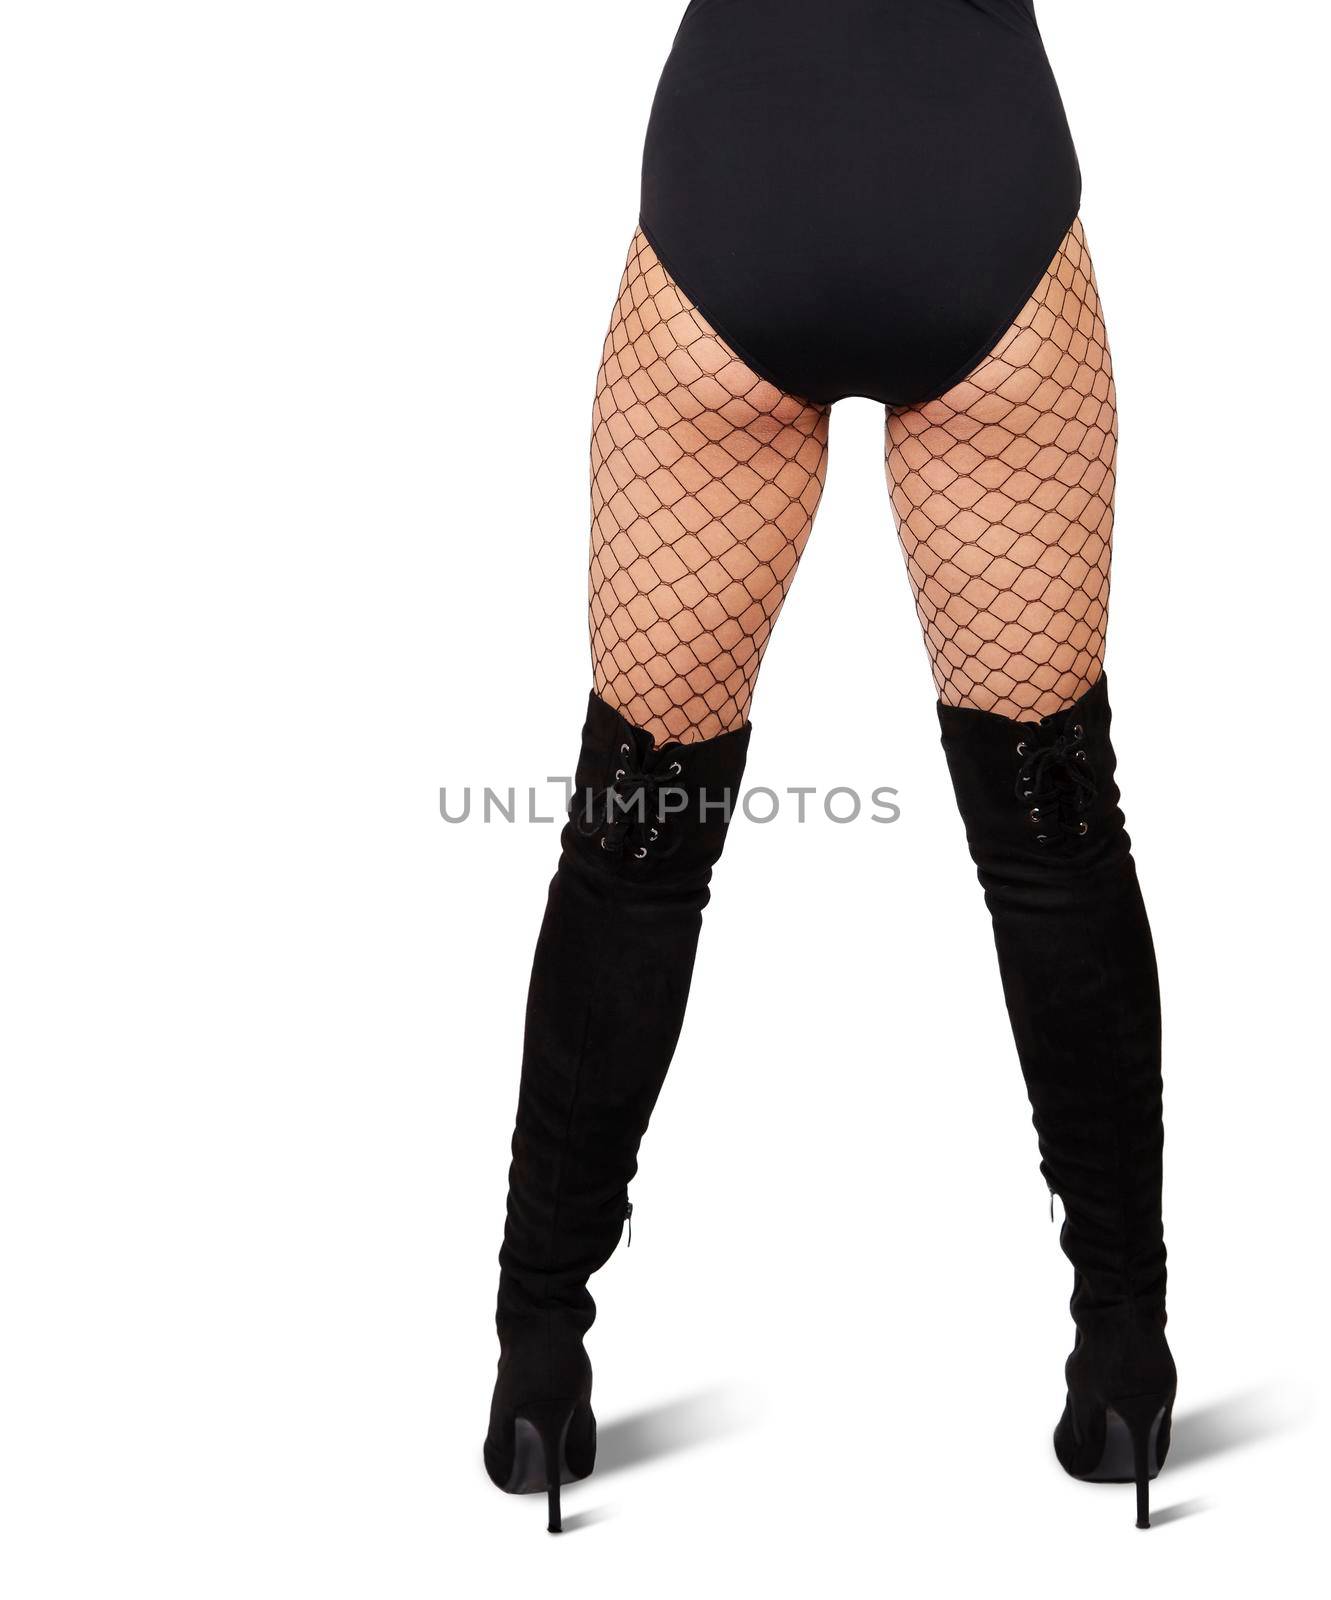 slender female legs in mesh tights and black boots on white background. back view